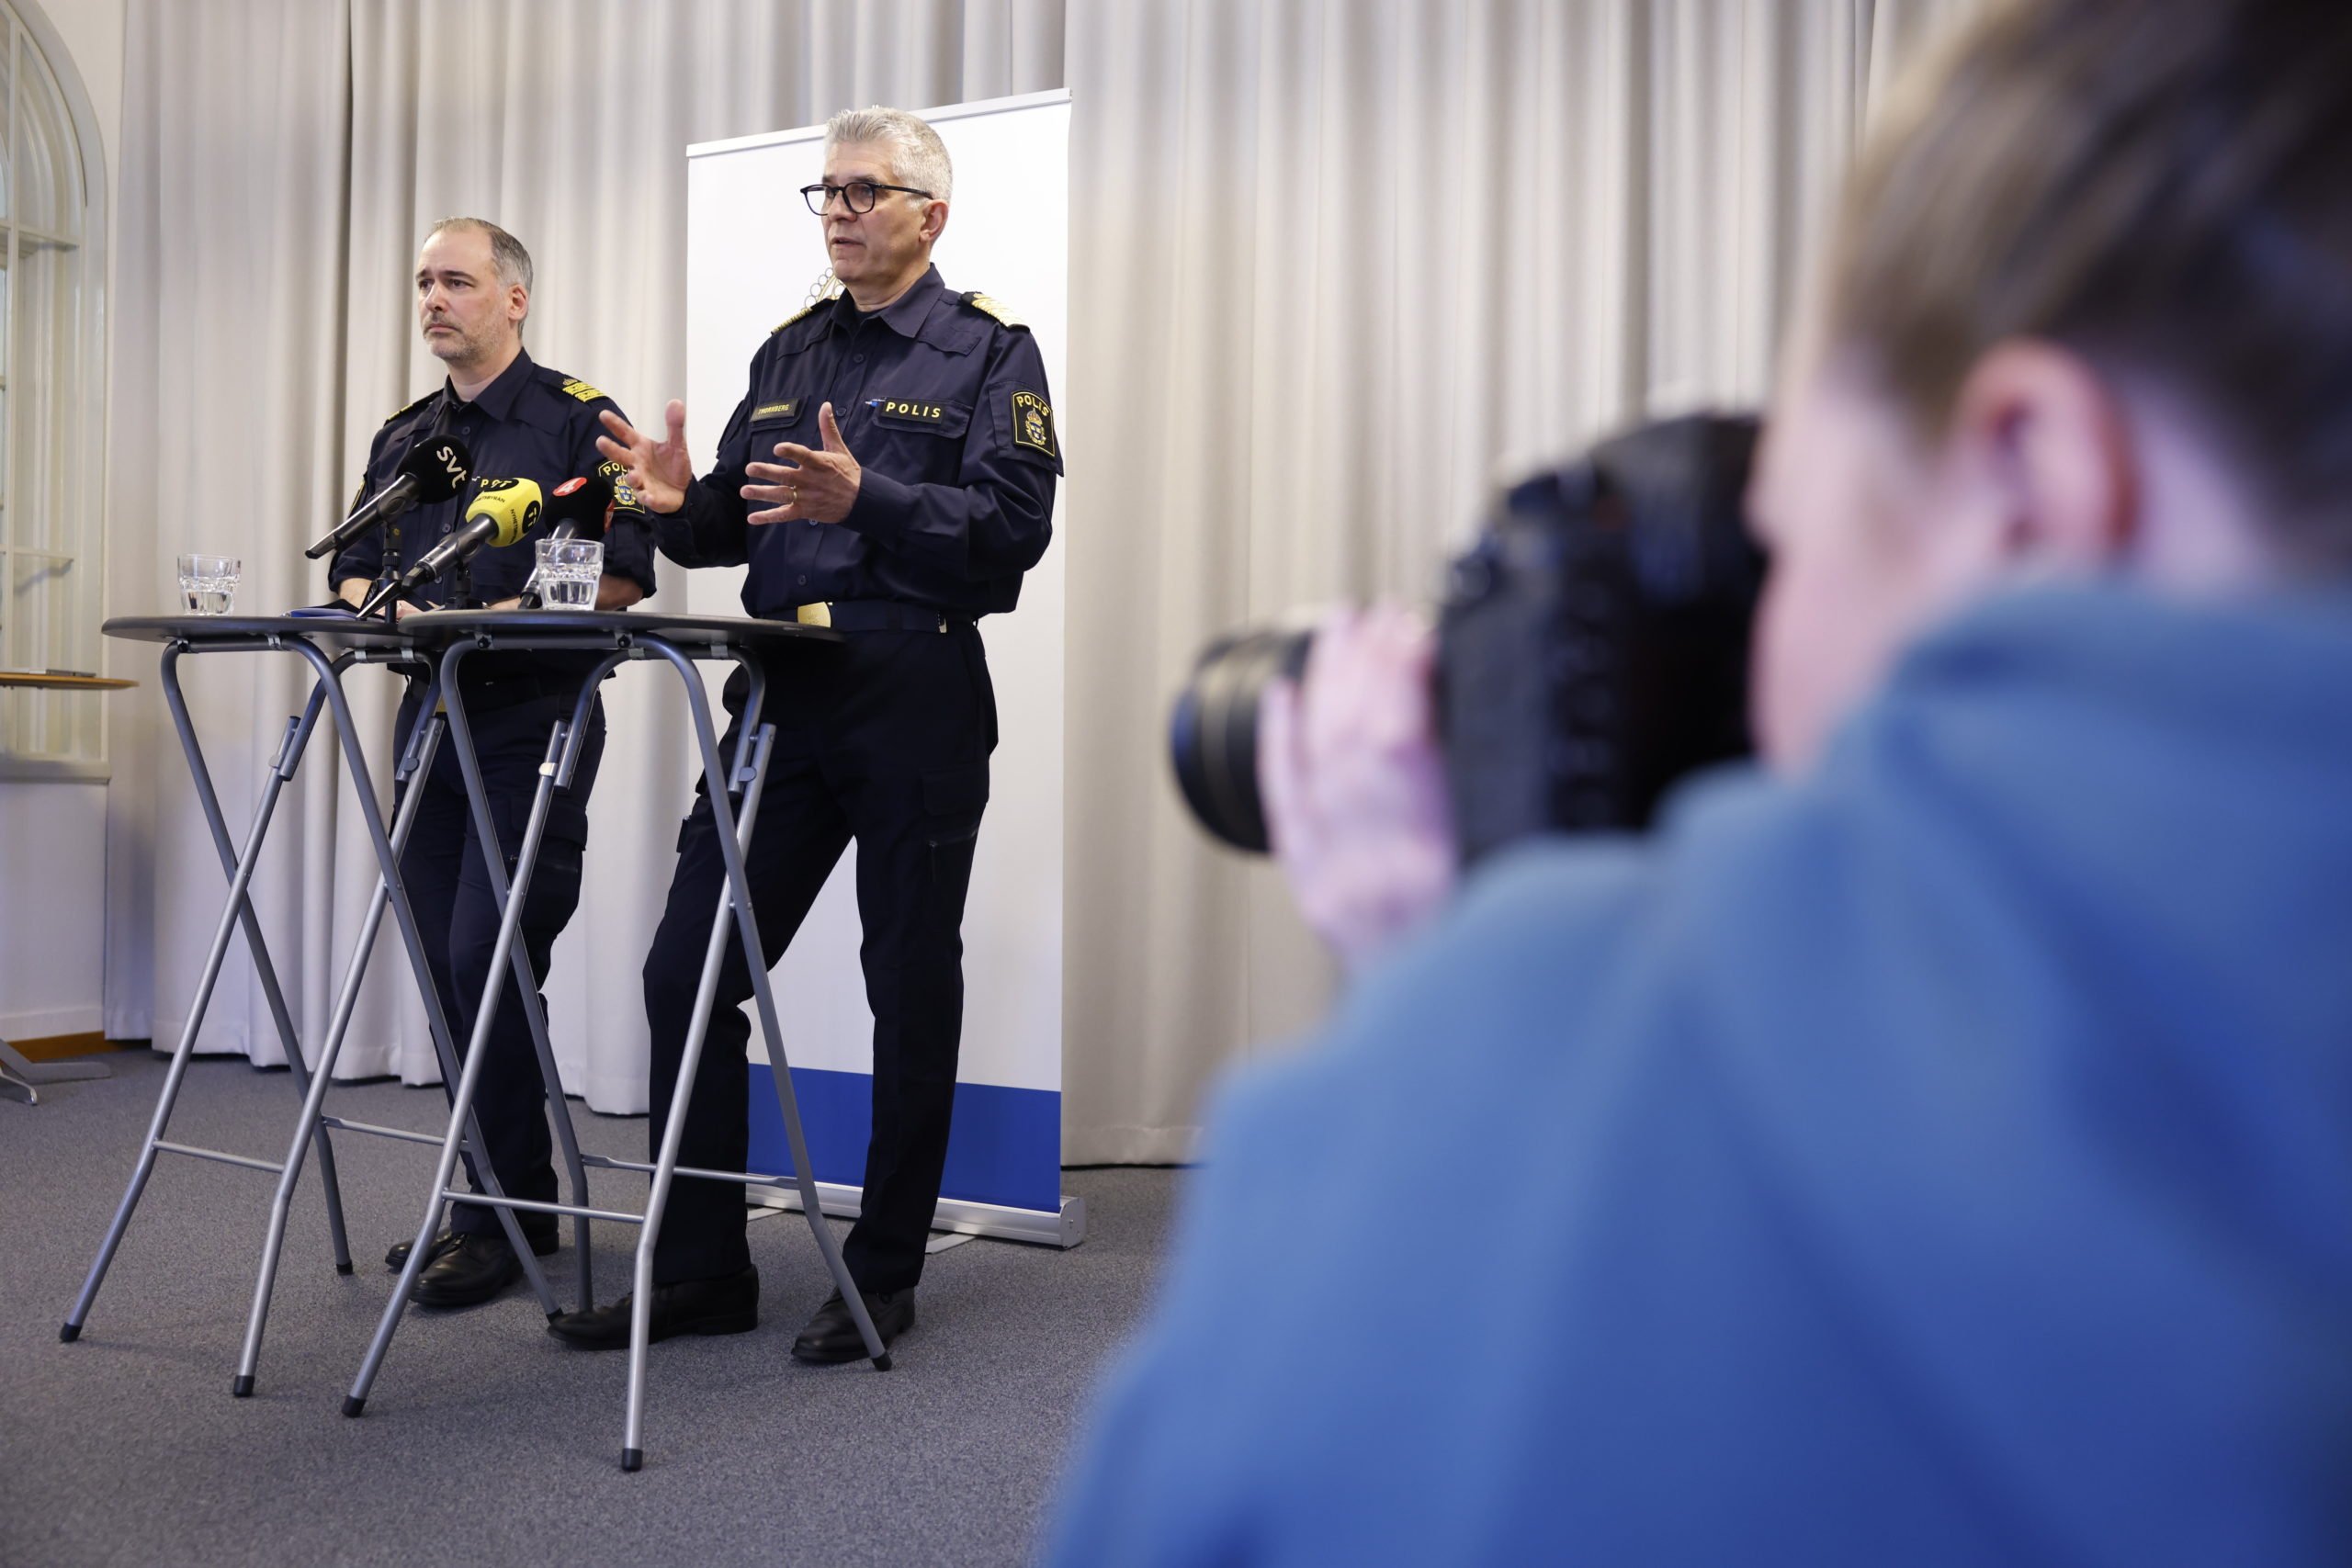 National Police Chief Anders Thornberg and Jonas Hysing, Commander-in-Chief on the left, have a press conference due to the violence of recent days. 